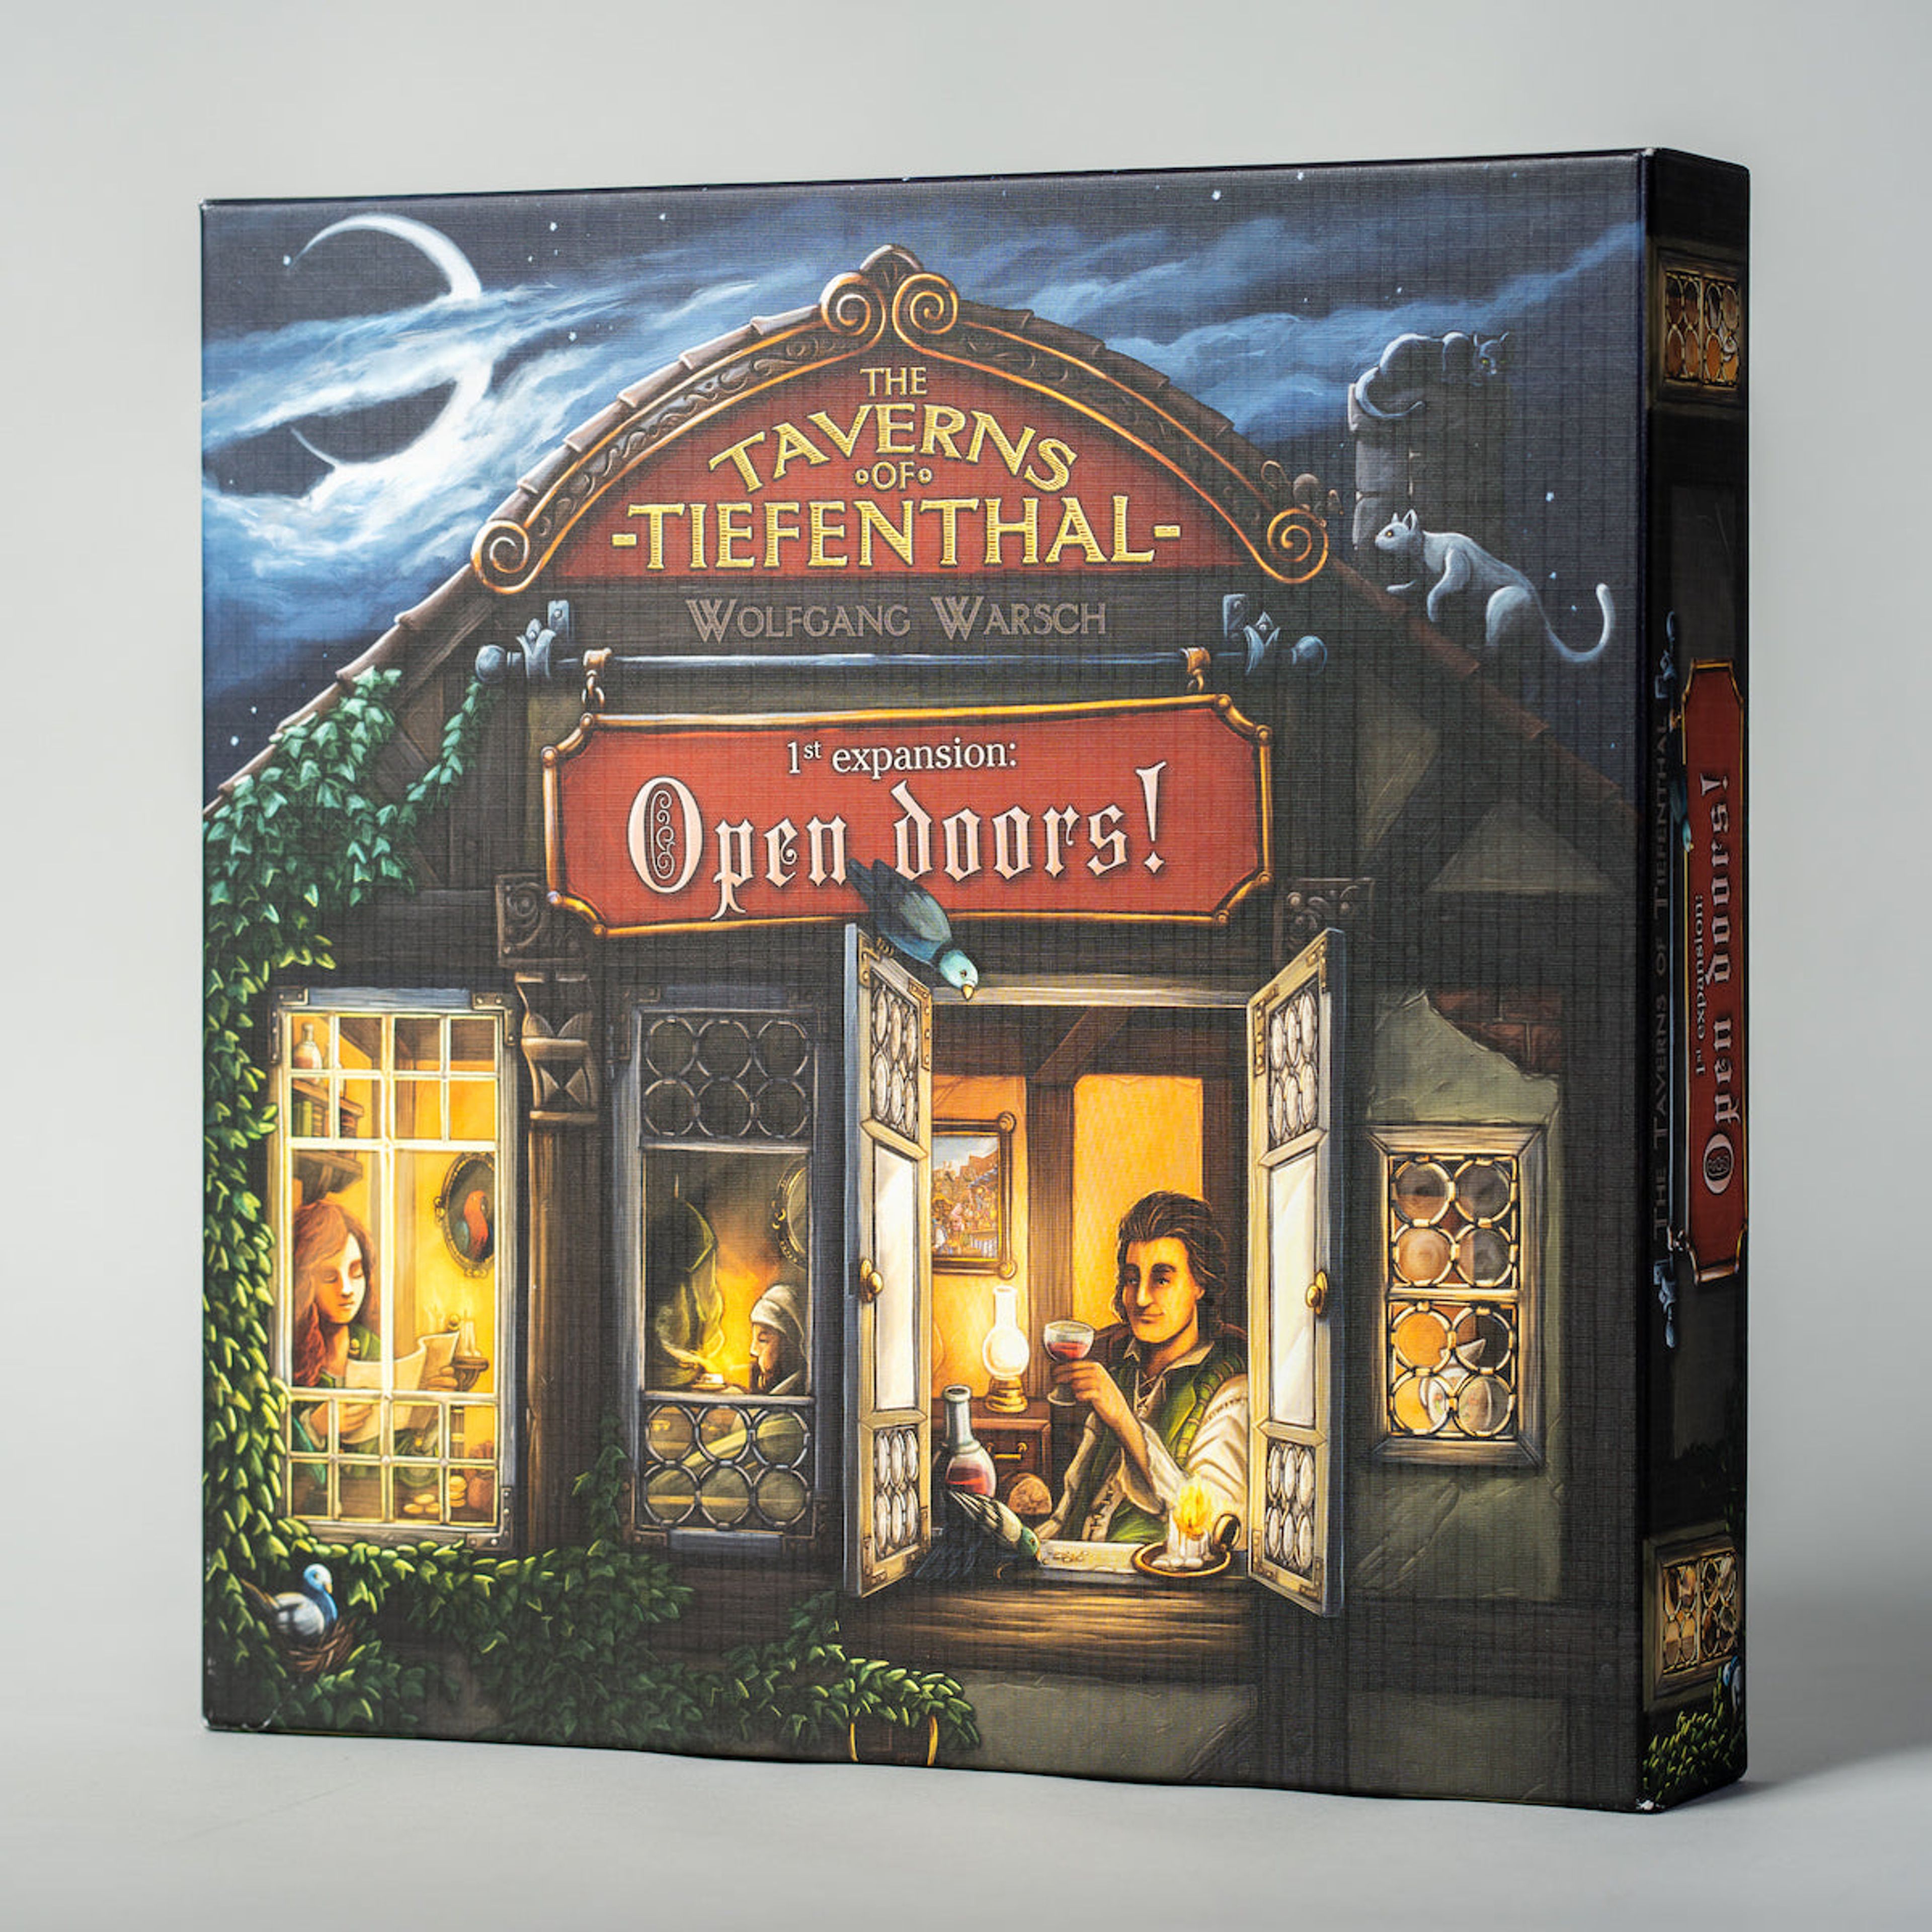 The Taverns of Tiefenthal: Open Doors!